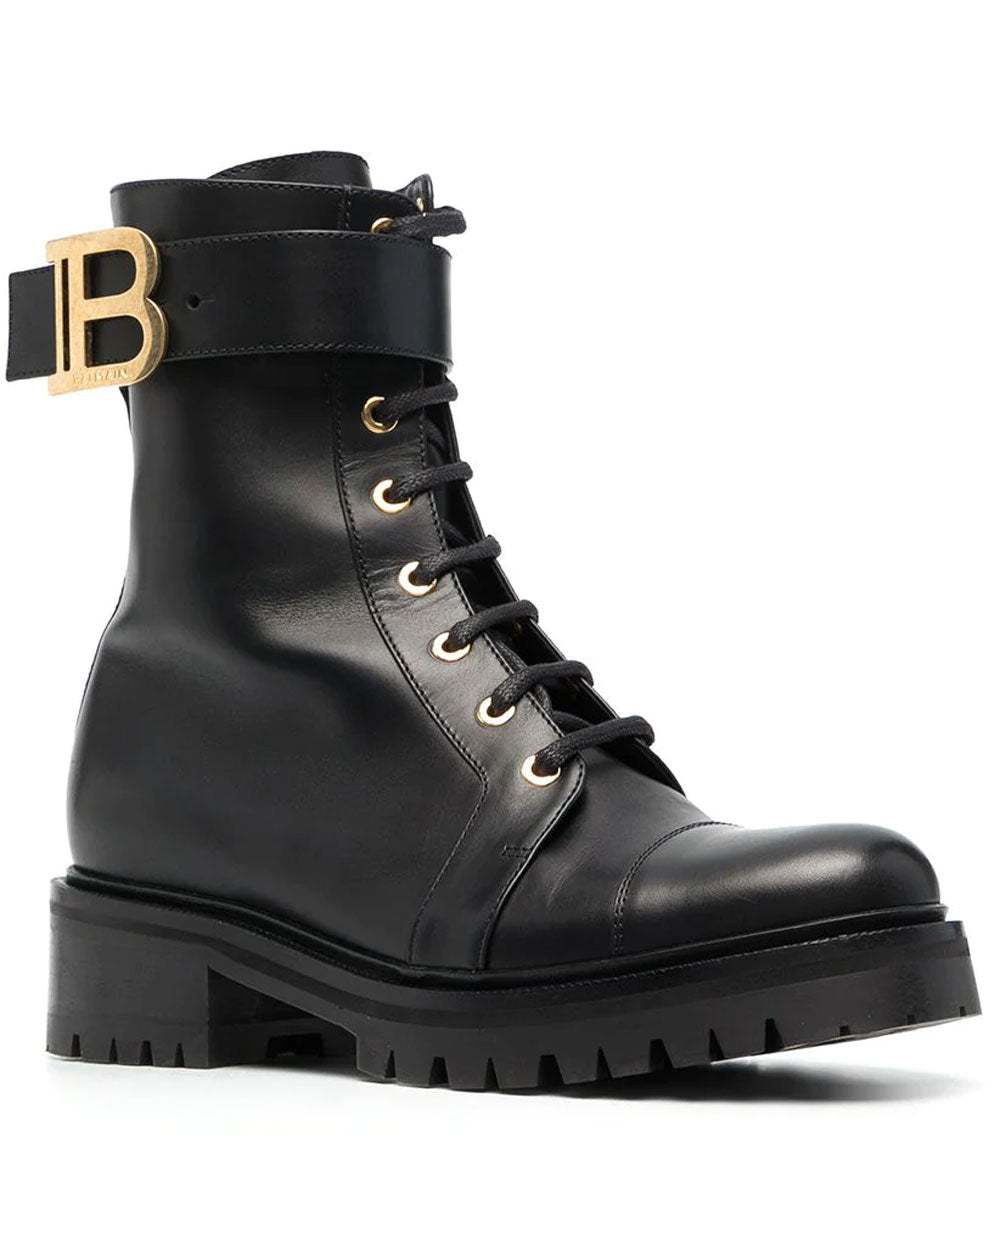 Ranger Leather Boots in Black